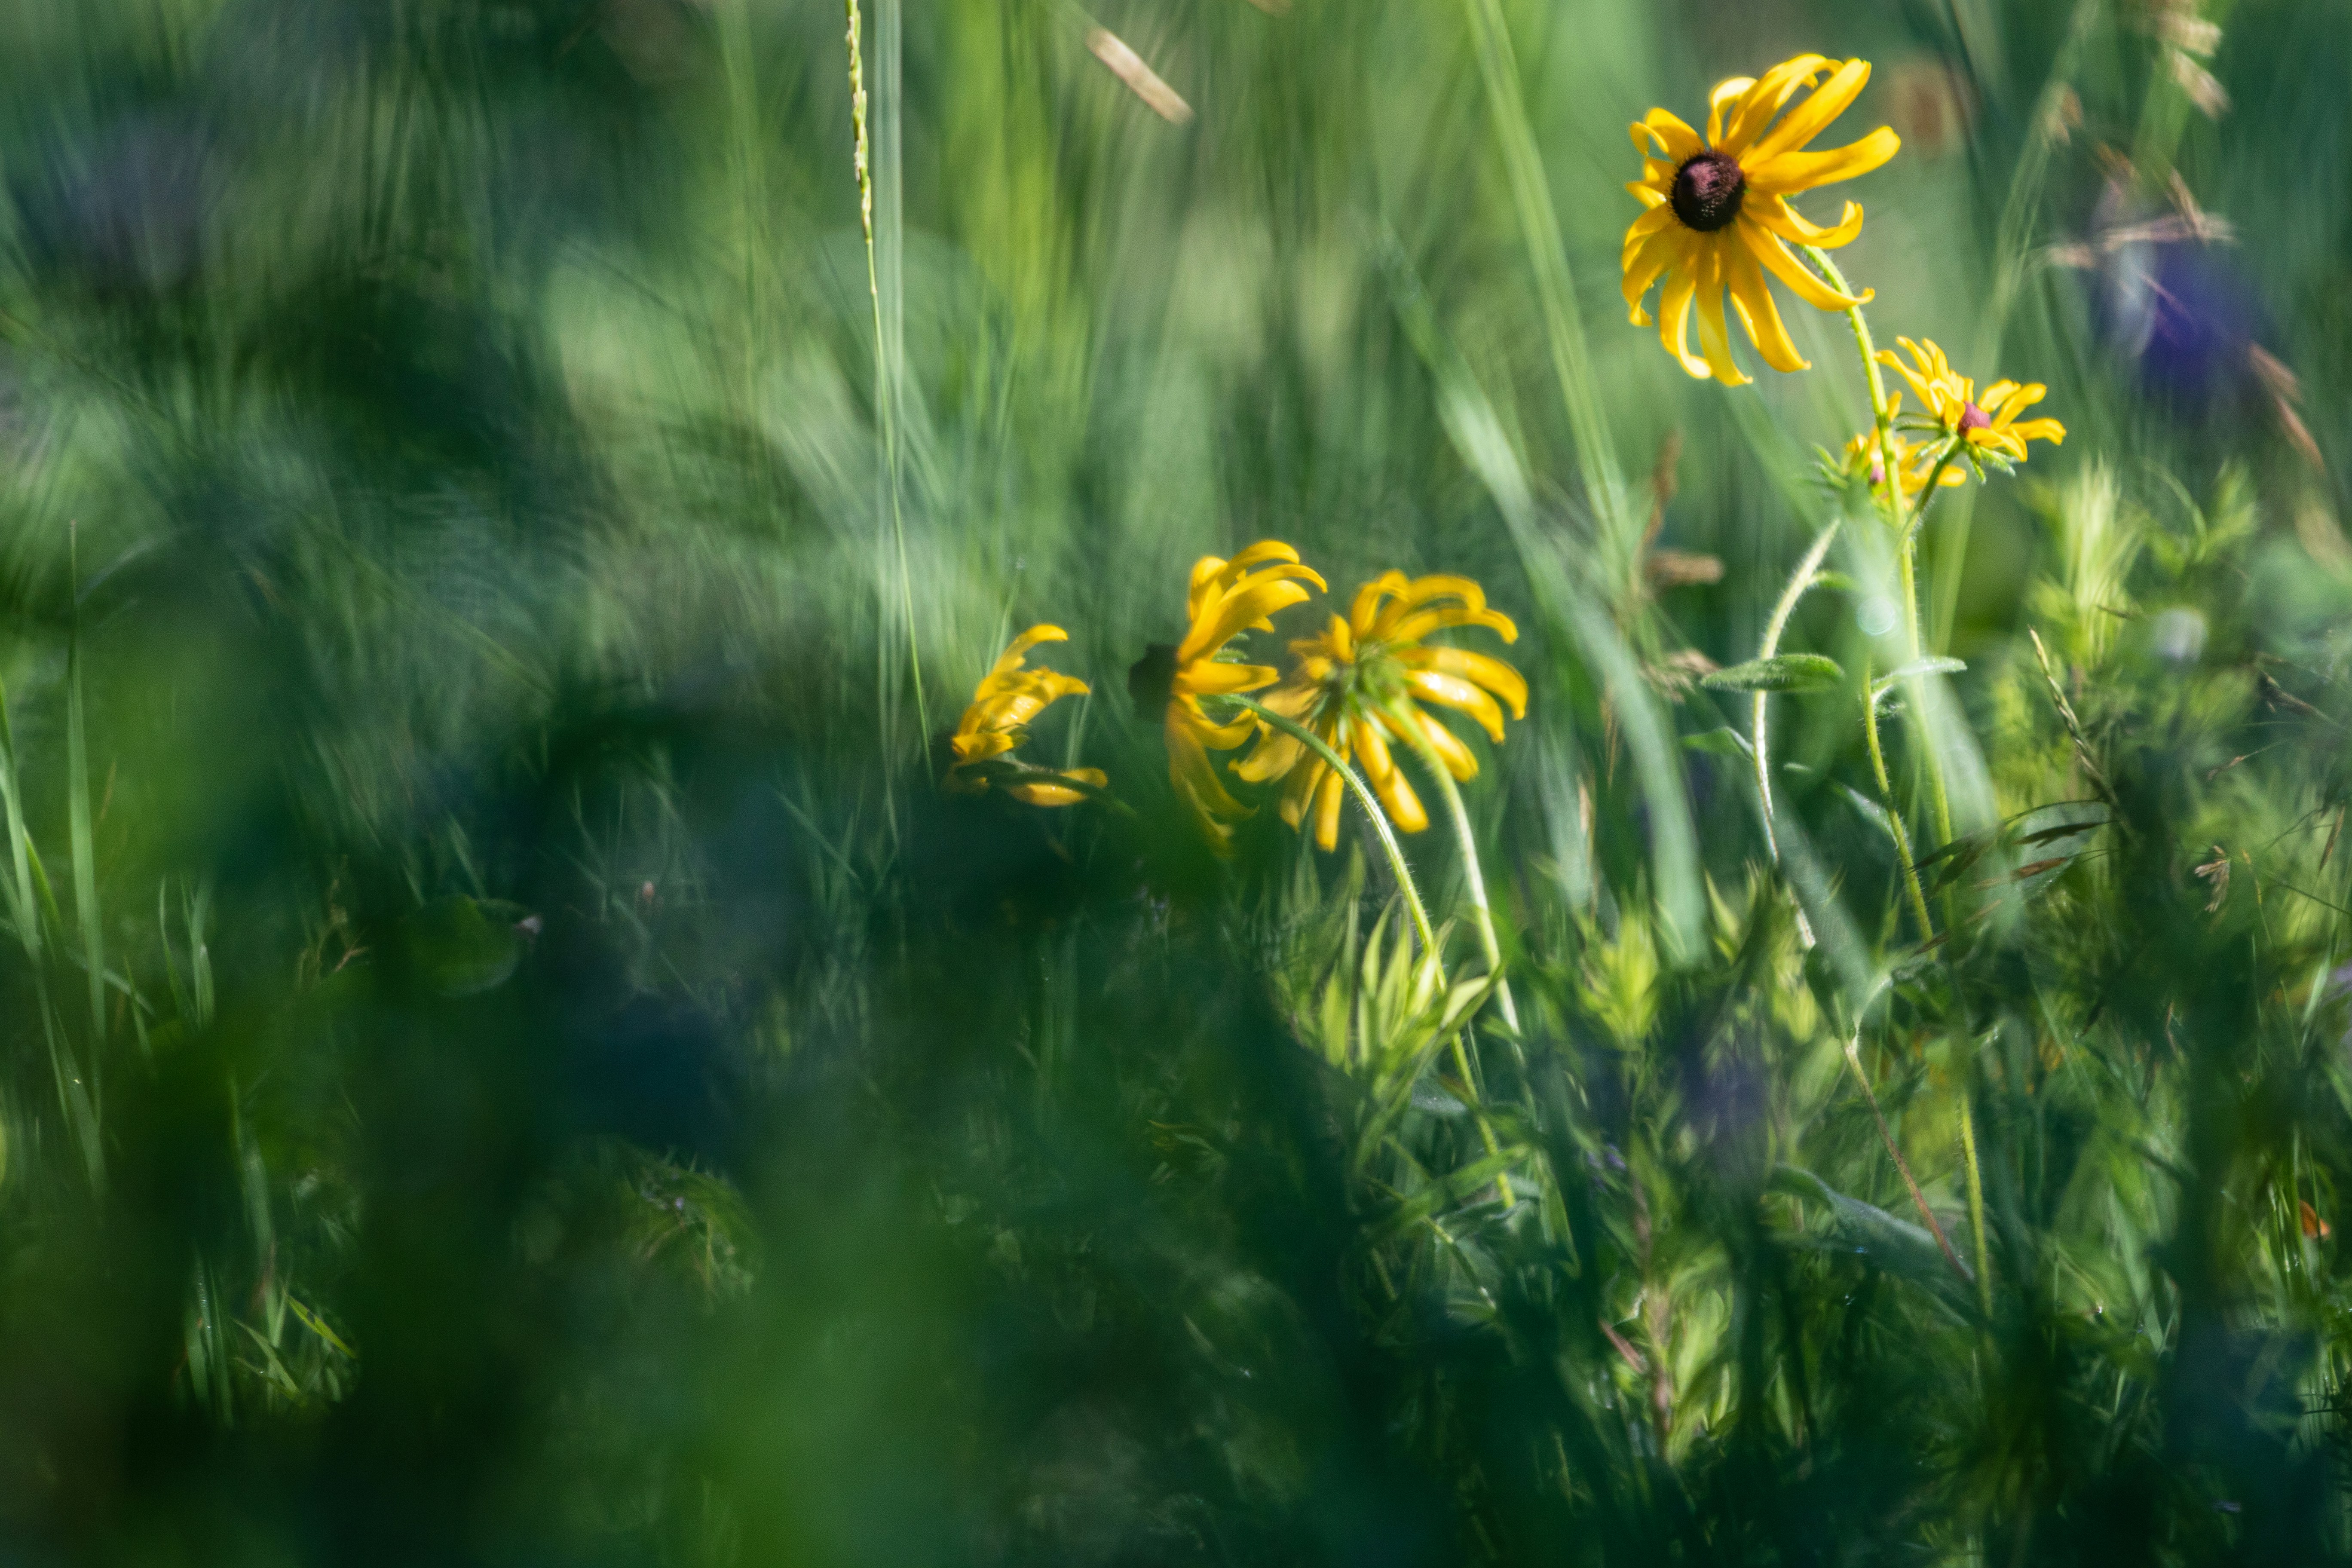 Dreamy black eyed susans in early morning light.